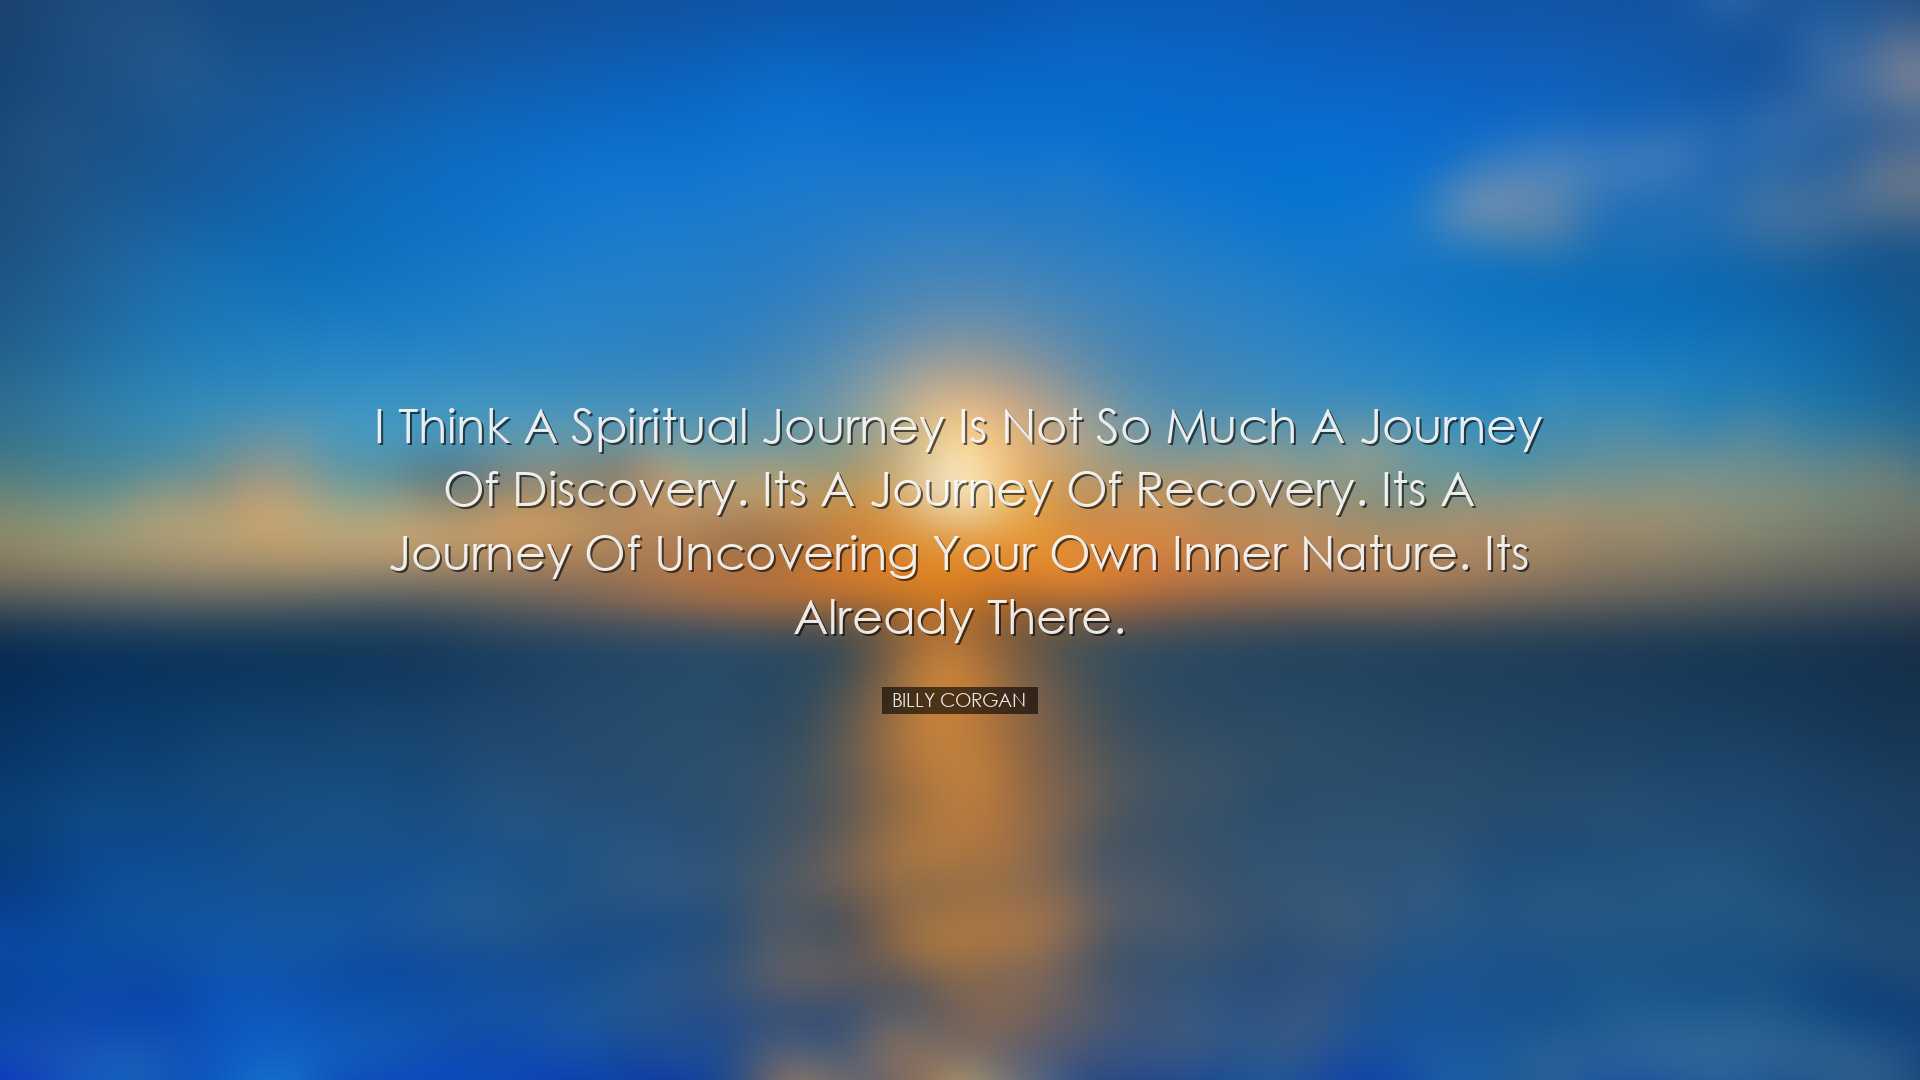 I think a spiritual journey is not so much a journey of discovery.